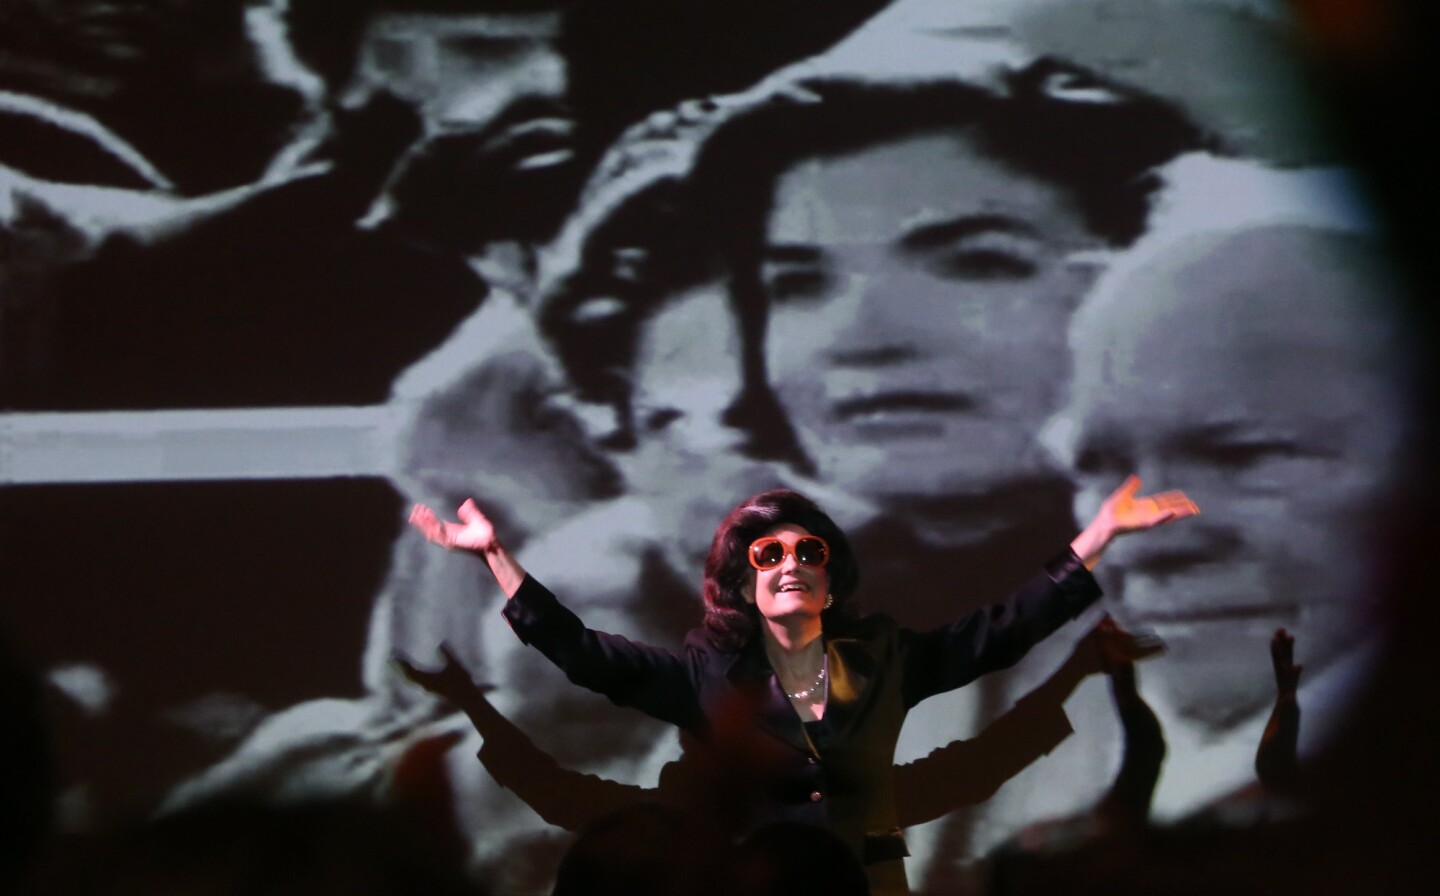 Controversial performance artist Karen Finley acknowledges the cheers of the audience in her performance of the one-woman show "The Jackie Look" at the Broad museum on Nov. 20, 2015. Finley takes on the persona of the iconic former first lady to address how we look at trauma